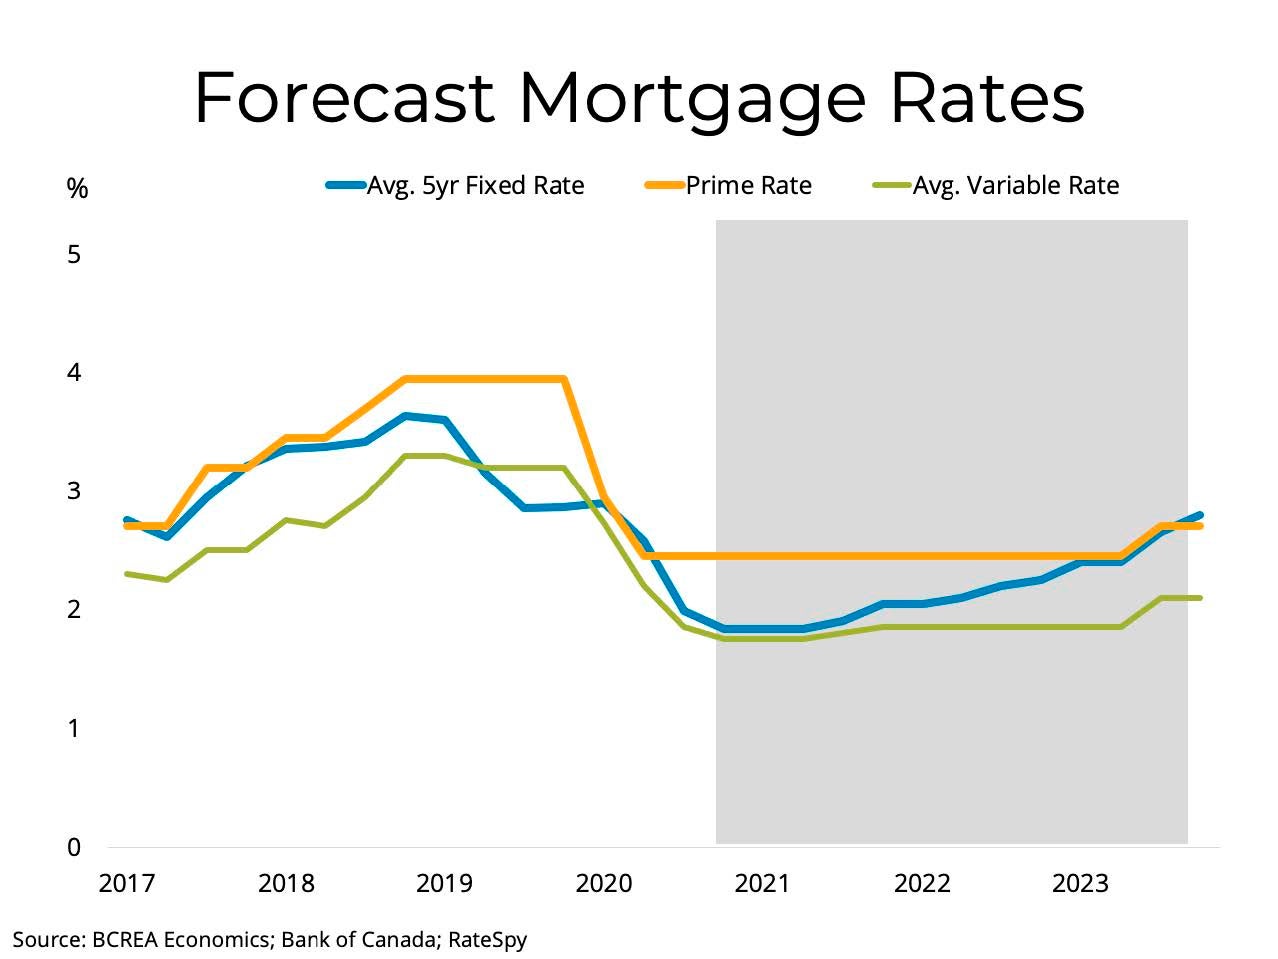 5152 Cce88353 Mortgagerateforecast 